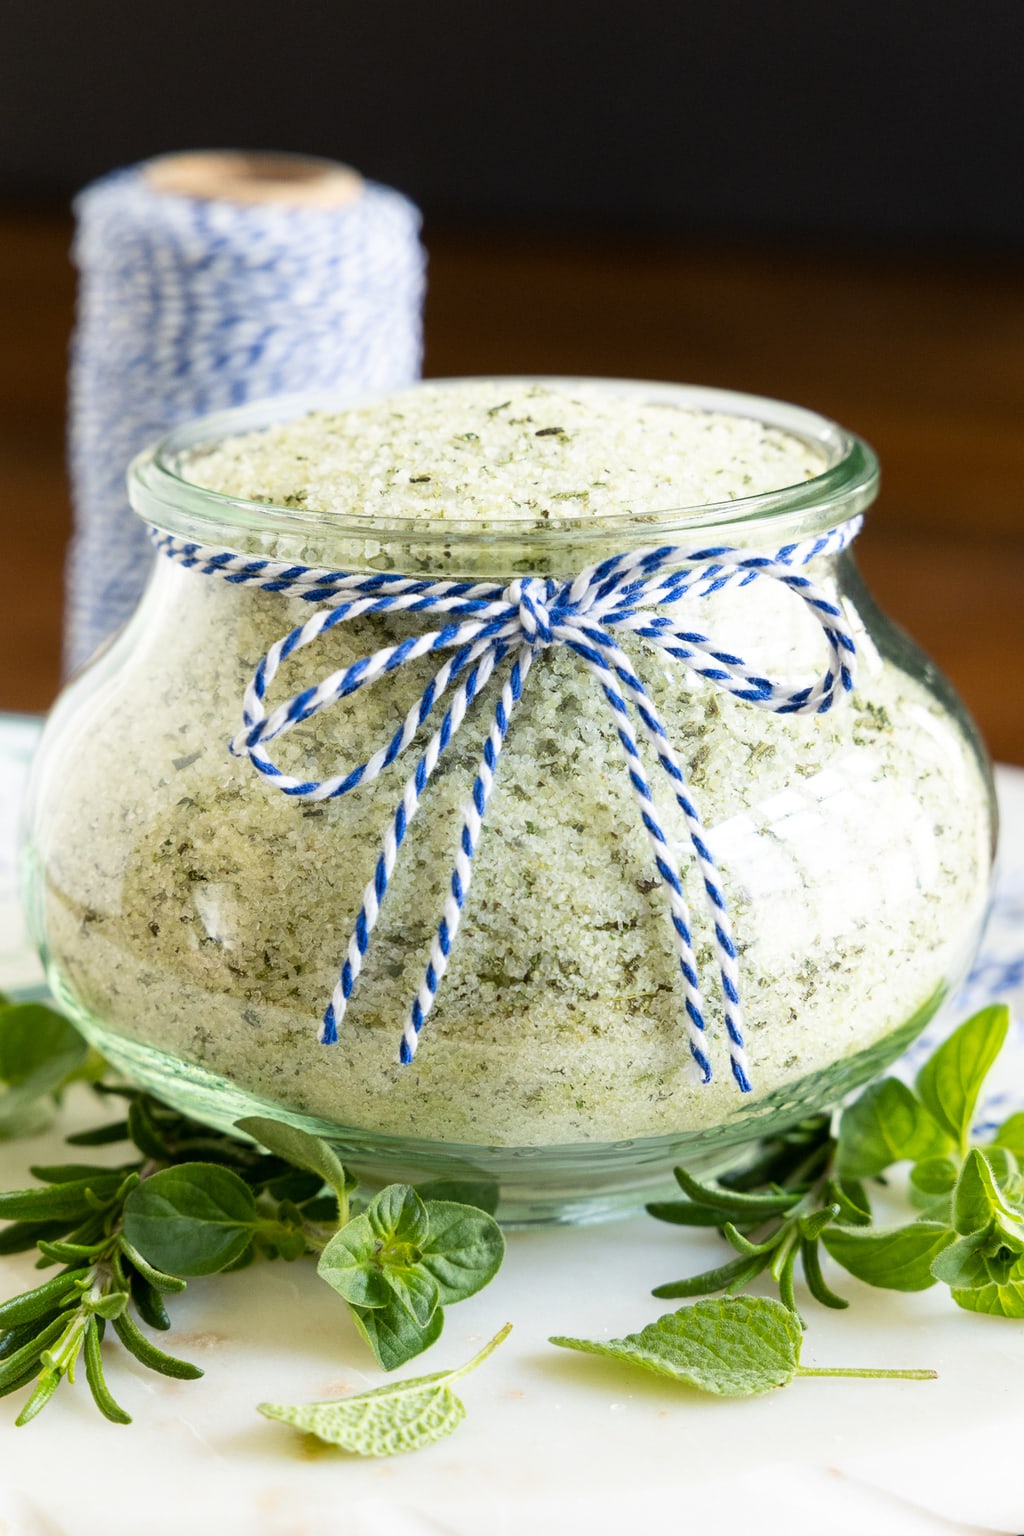 Vertical closeup photo of Tuscan Herbed Sea Salt (Sale alle Erbe) in a Weck glass jar garnished with fresh herbs and decorative string.